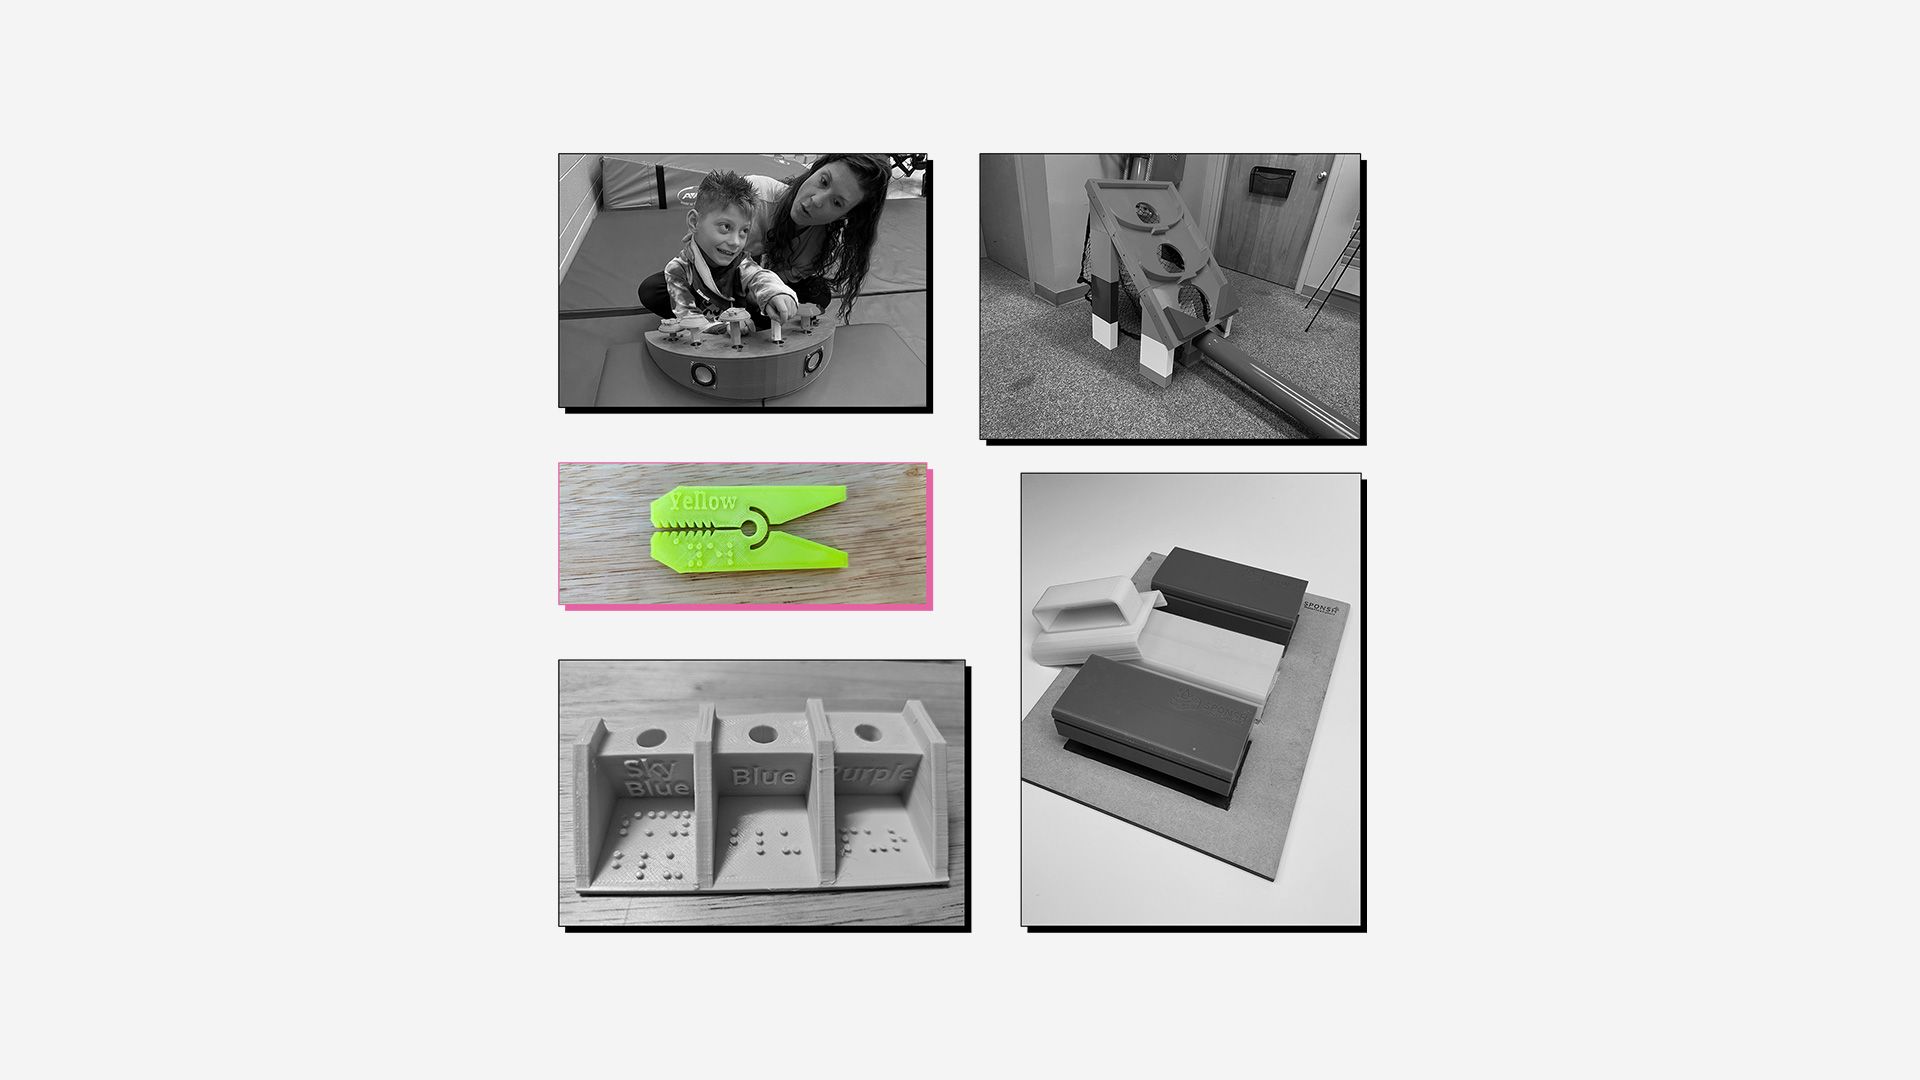 Collage of 3D printed assistive devices with winning entry (braille peg) highlighted.